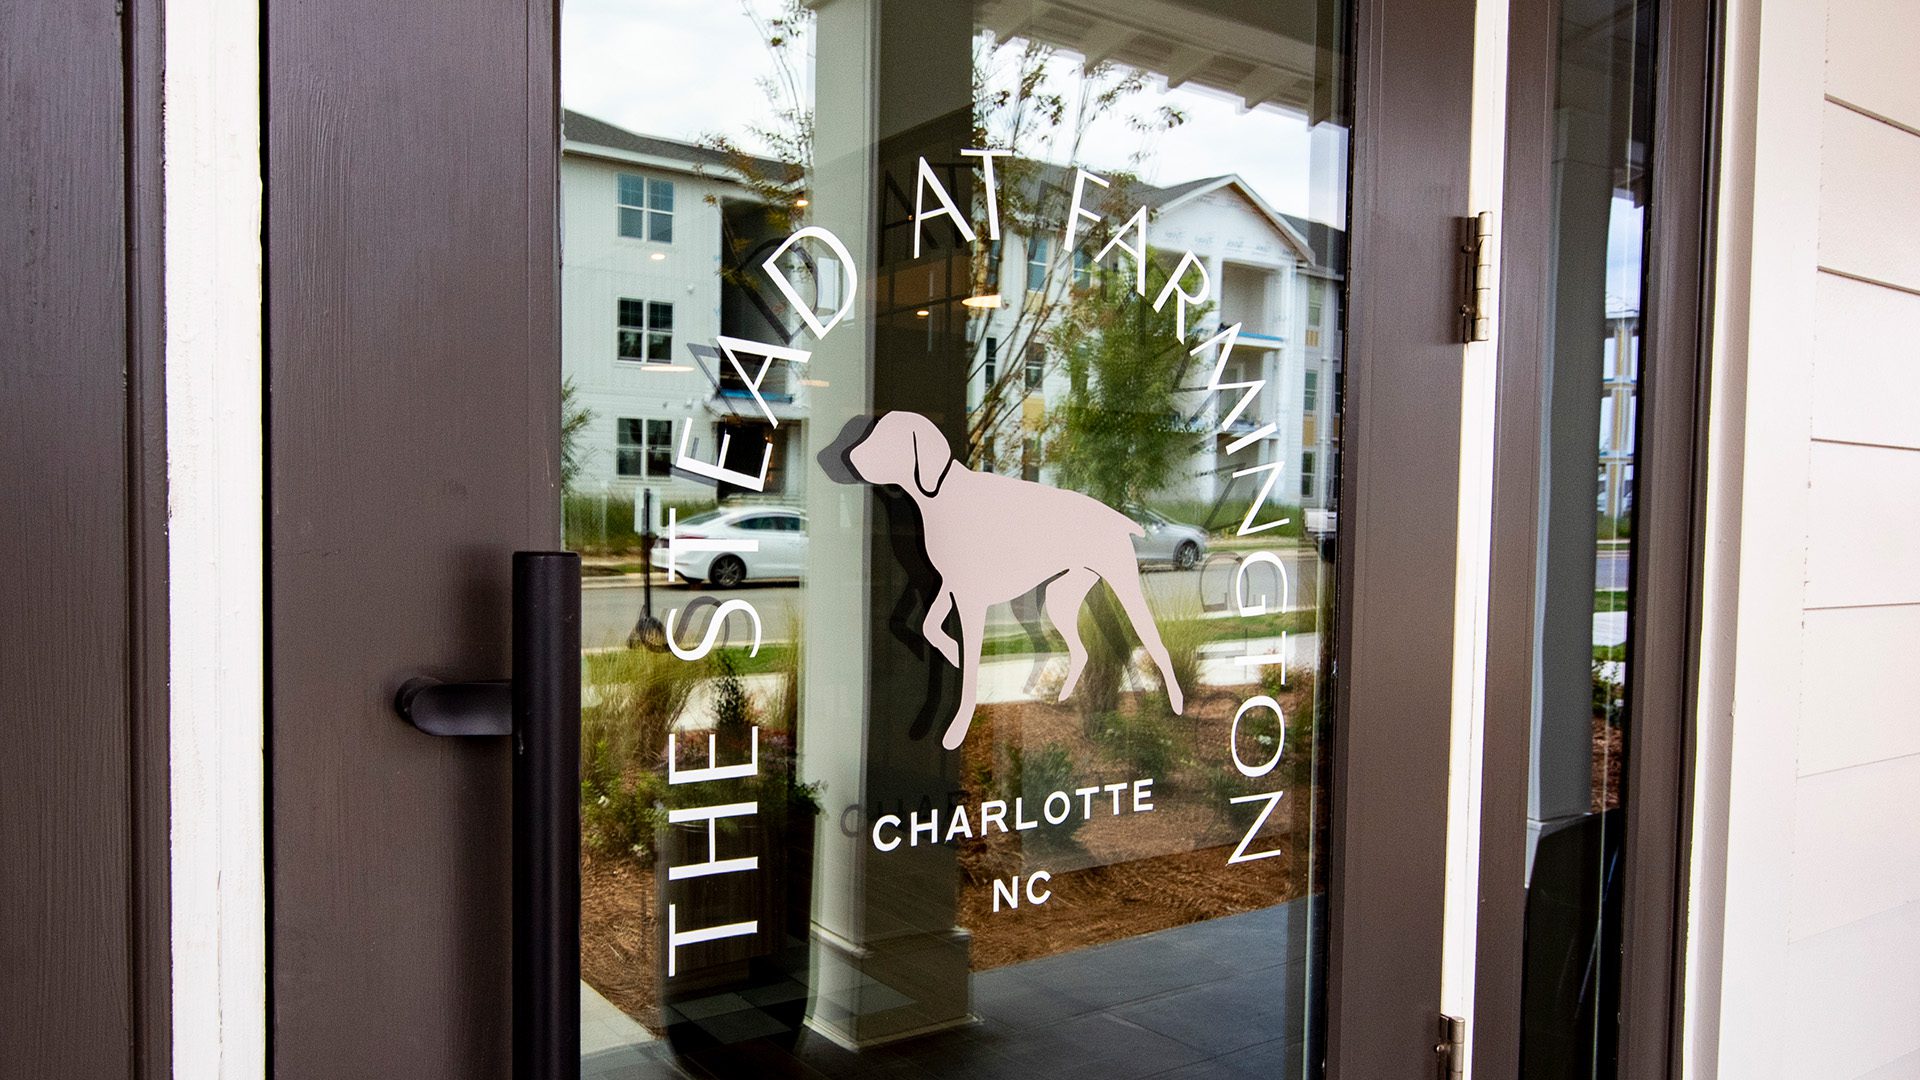 The Stead sign on glass door with dog pointing